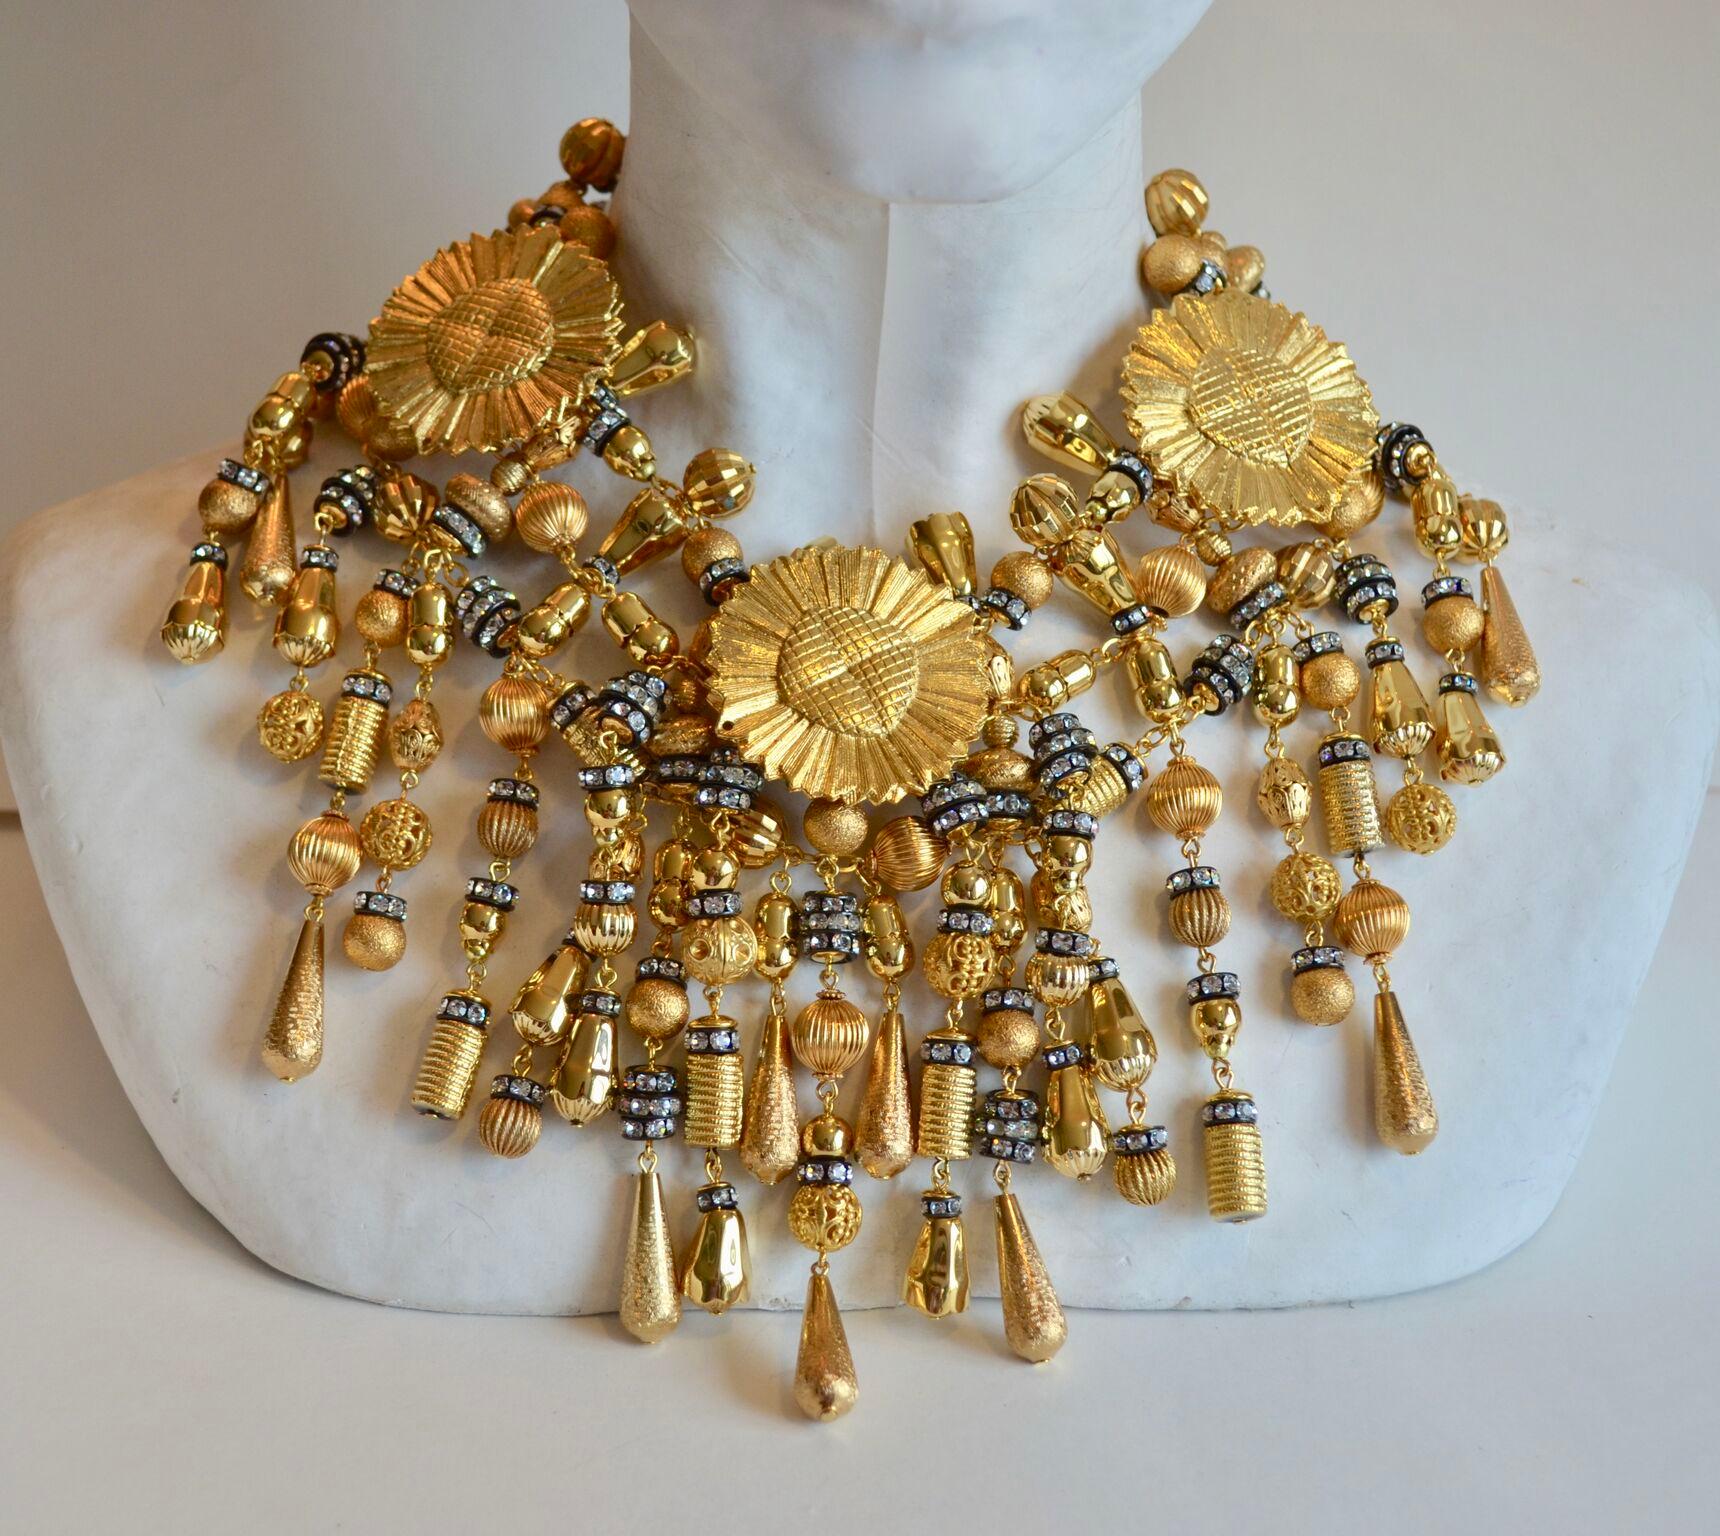 A real showstopper! This piece from Francoise Montague is made with gold beads as well as Swarovski crystals. 